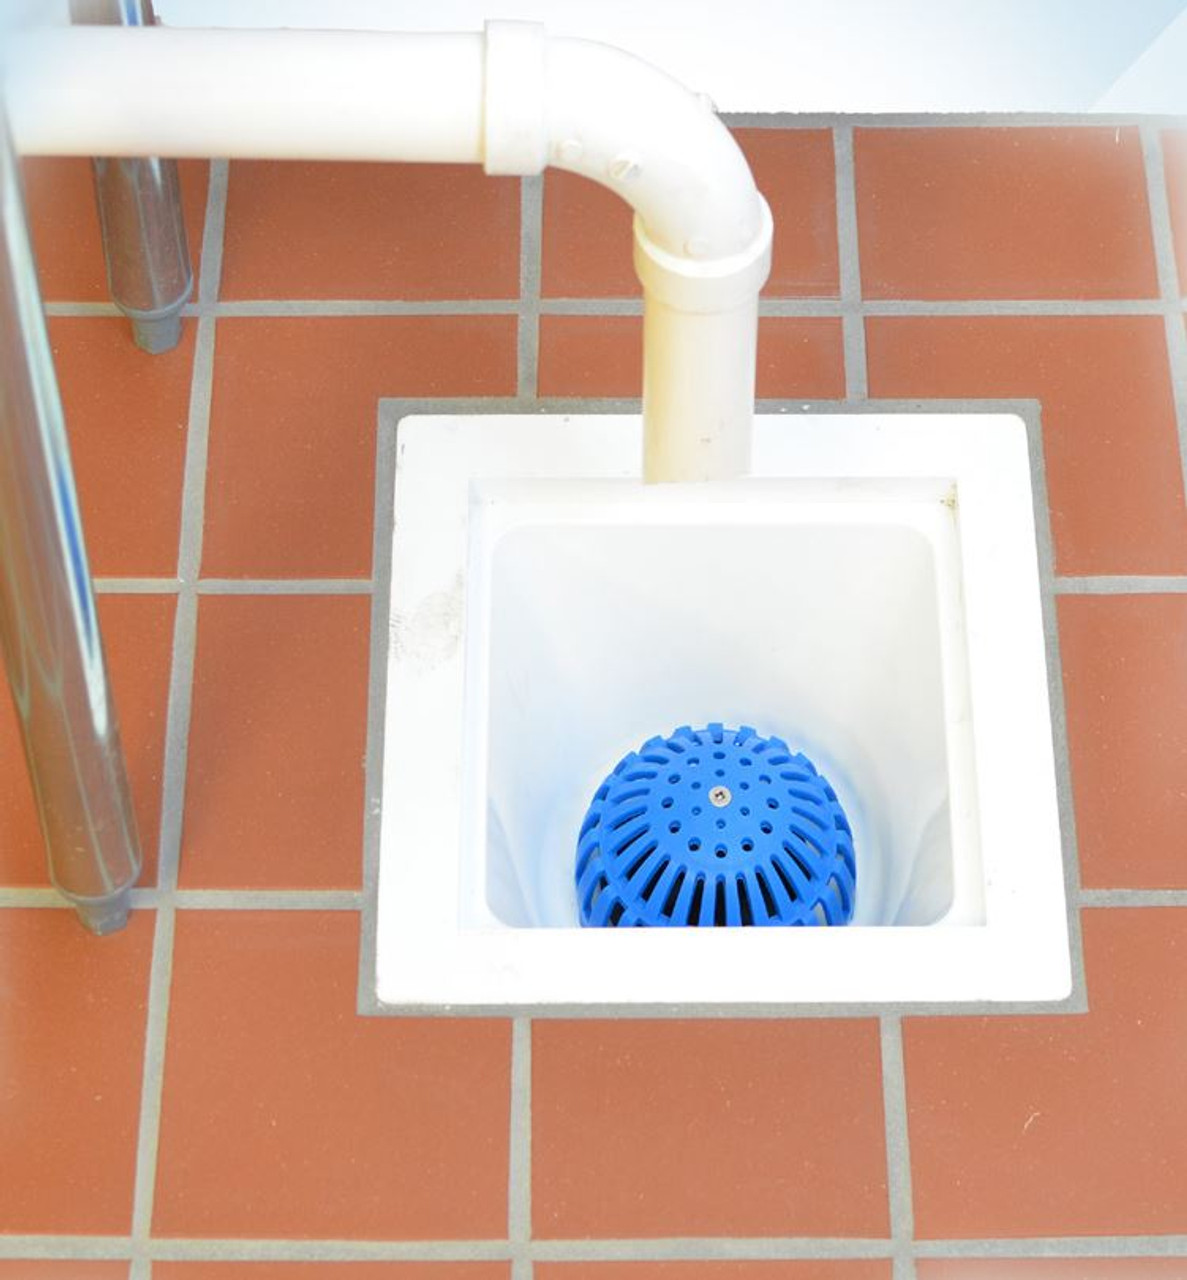 Replacement Dome Strainer for floor sinks